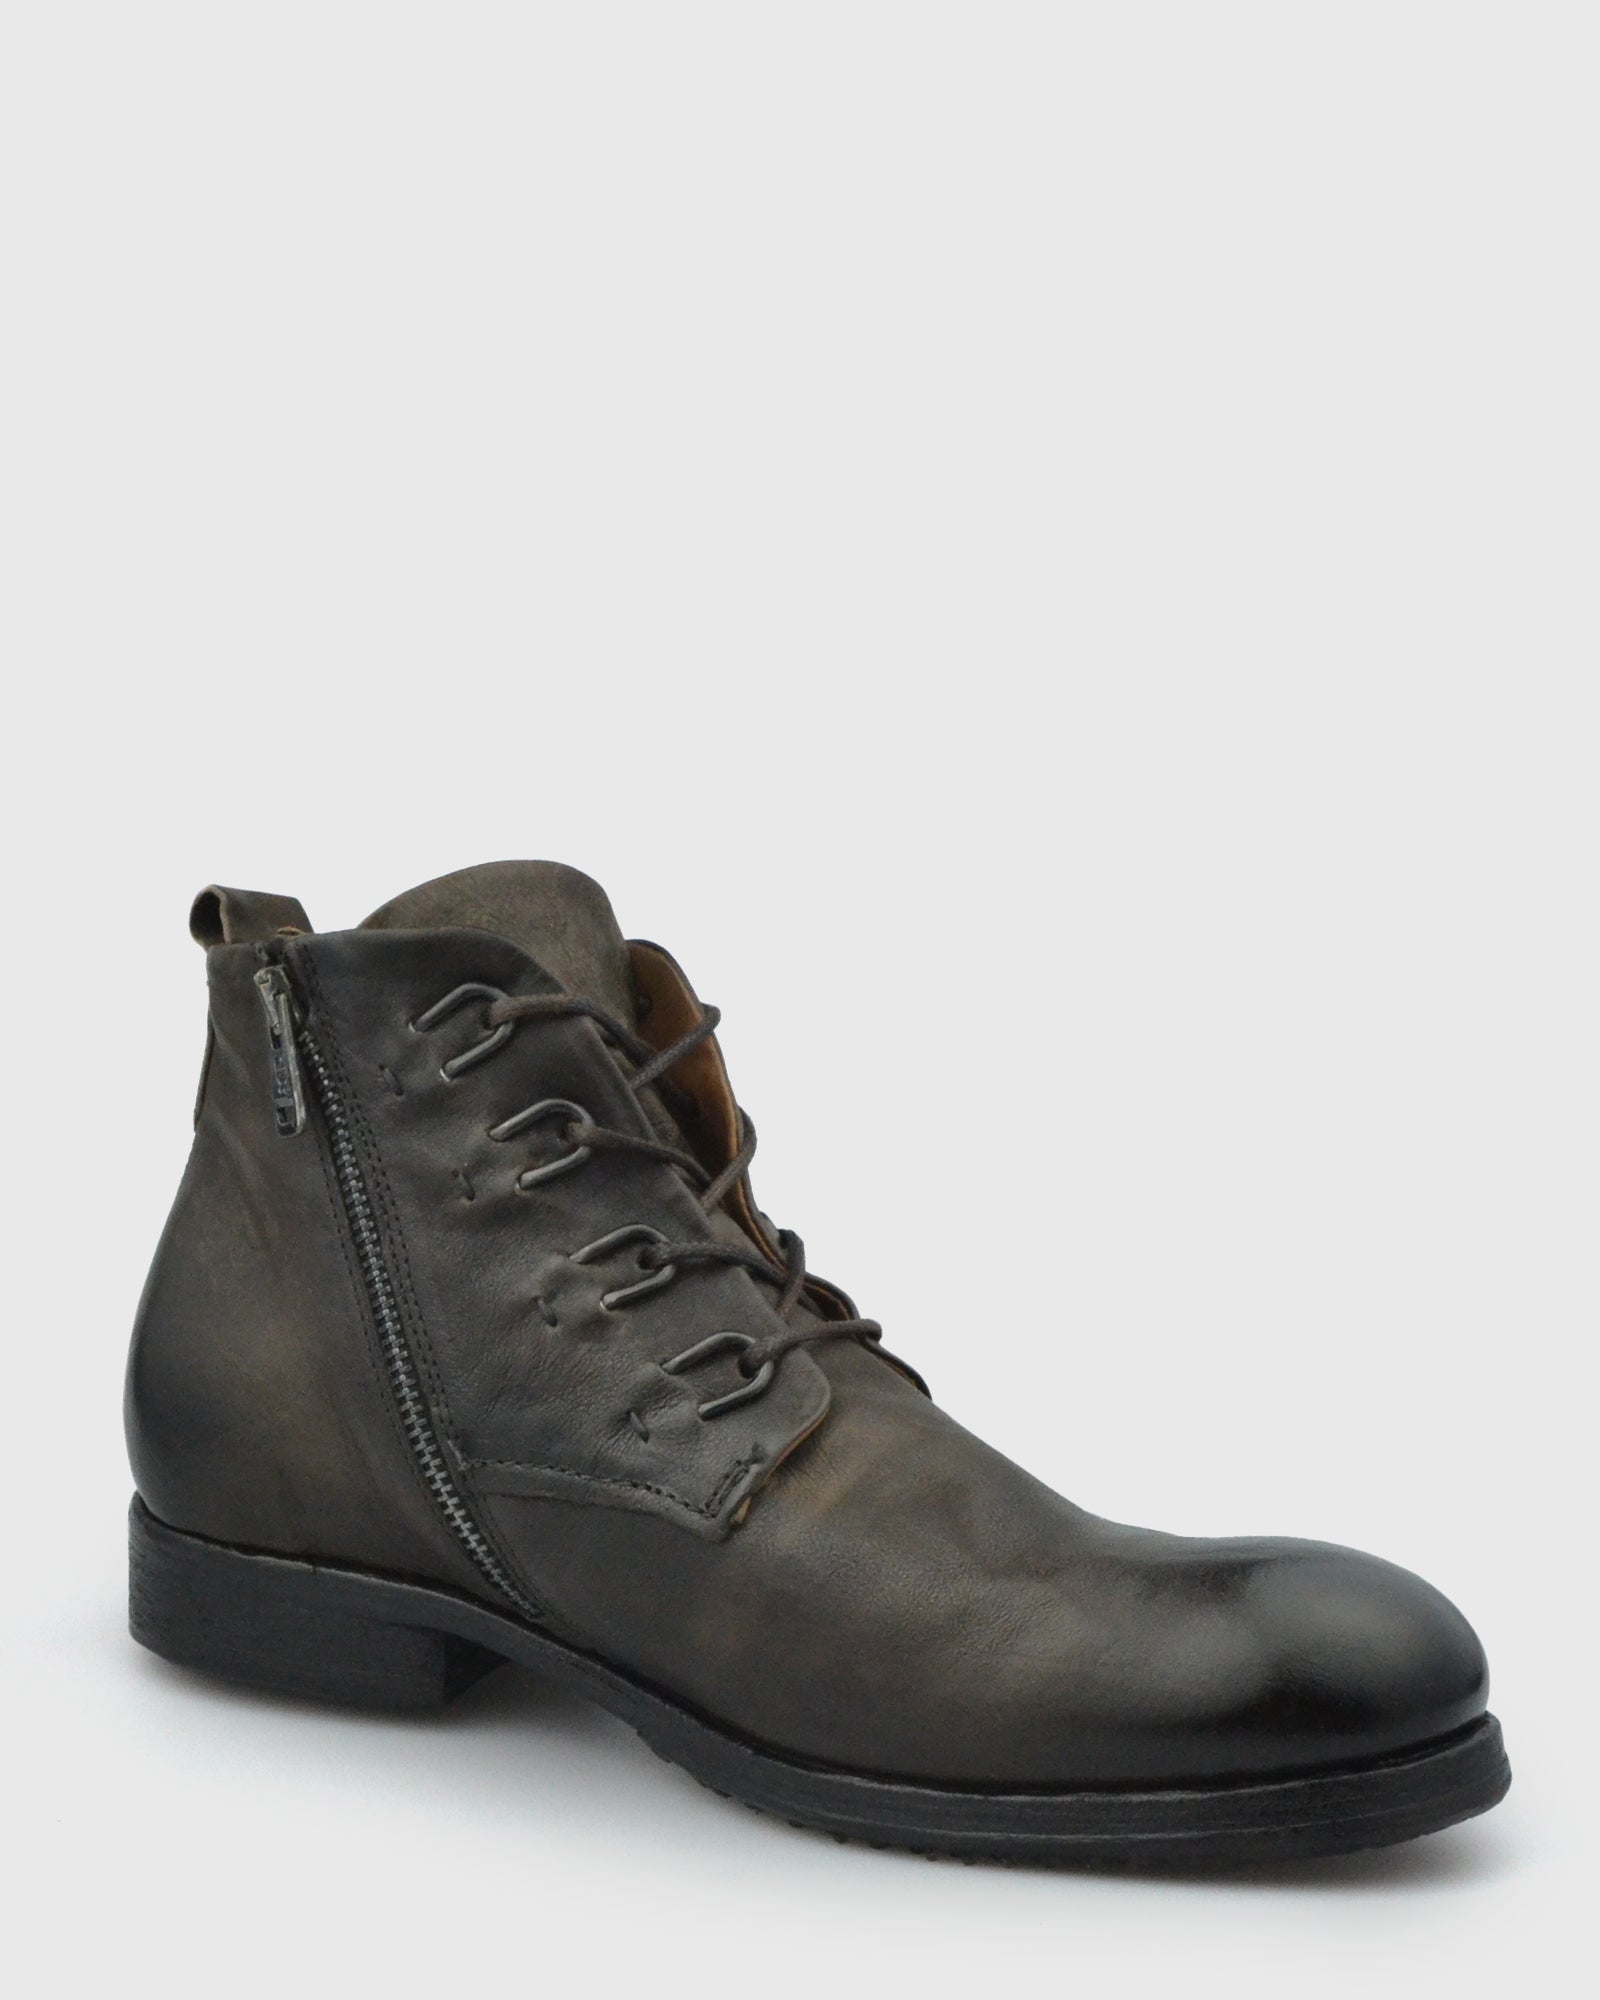 AS98 401236AS98 BROWN BOOT